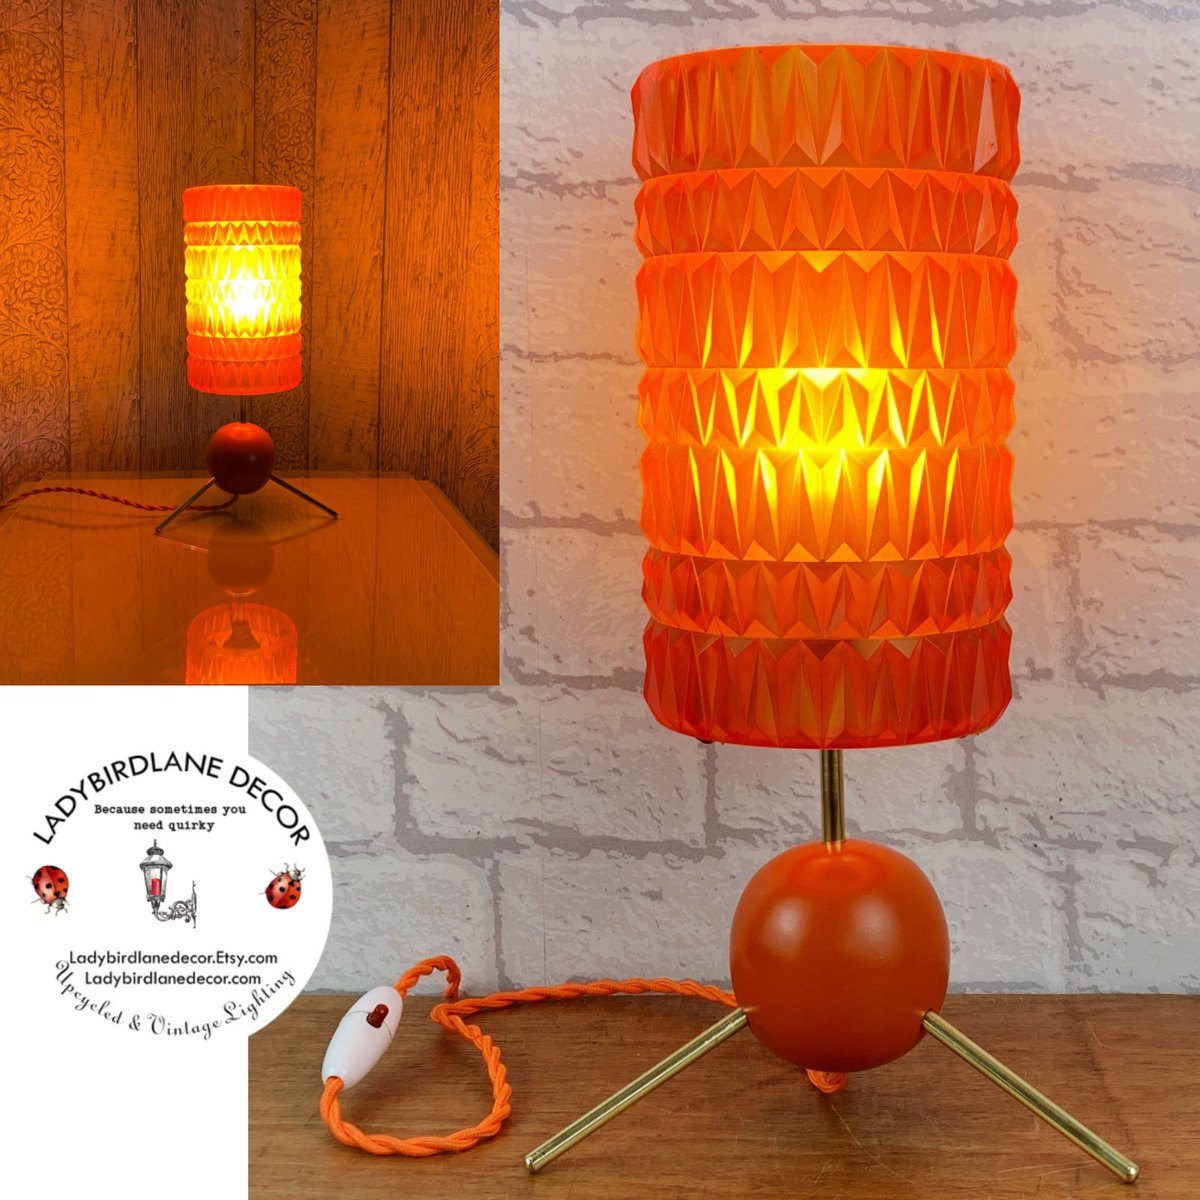 𝗩𝗶𝗻𝘁𝗮𝗴𝗲 𝗶𝘀 𝘁𝗵𝗲 𝗻𝗲𝘄 𝗲𝗿𝗿… 𝗻𝗲𝘄 🙈 You’re not just buying a lamp - you’re buying character, history & craftsmanship. This beautiful orange atomic style lamp has been restored, rewired & re-shaded. There’s only one and it could be yours 🥳 #MHHSBD